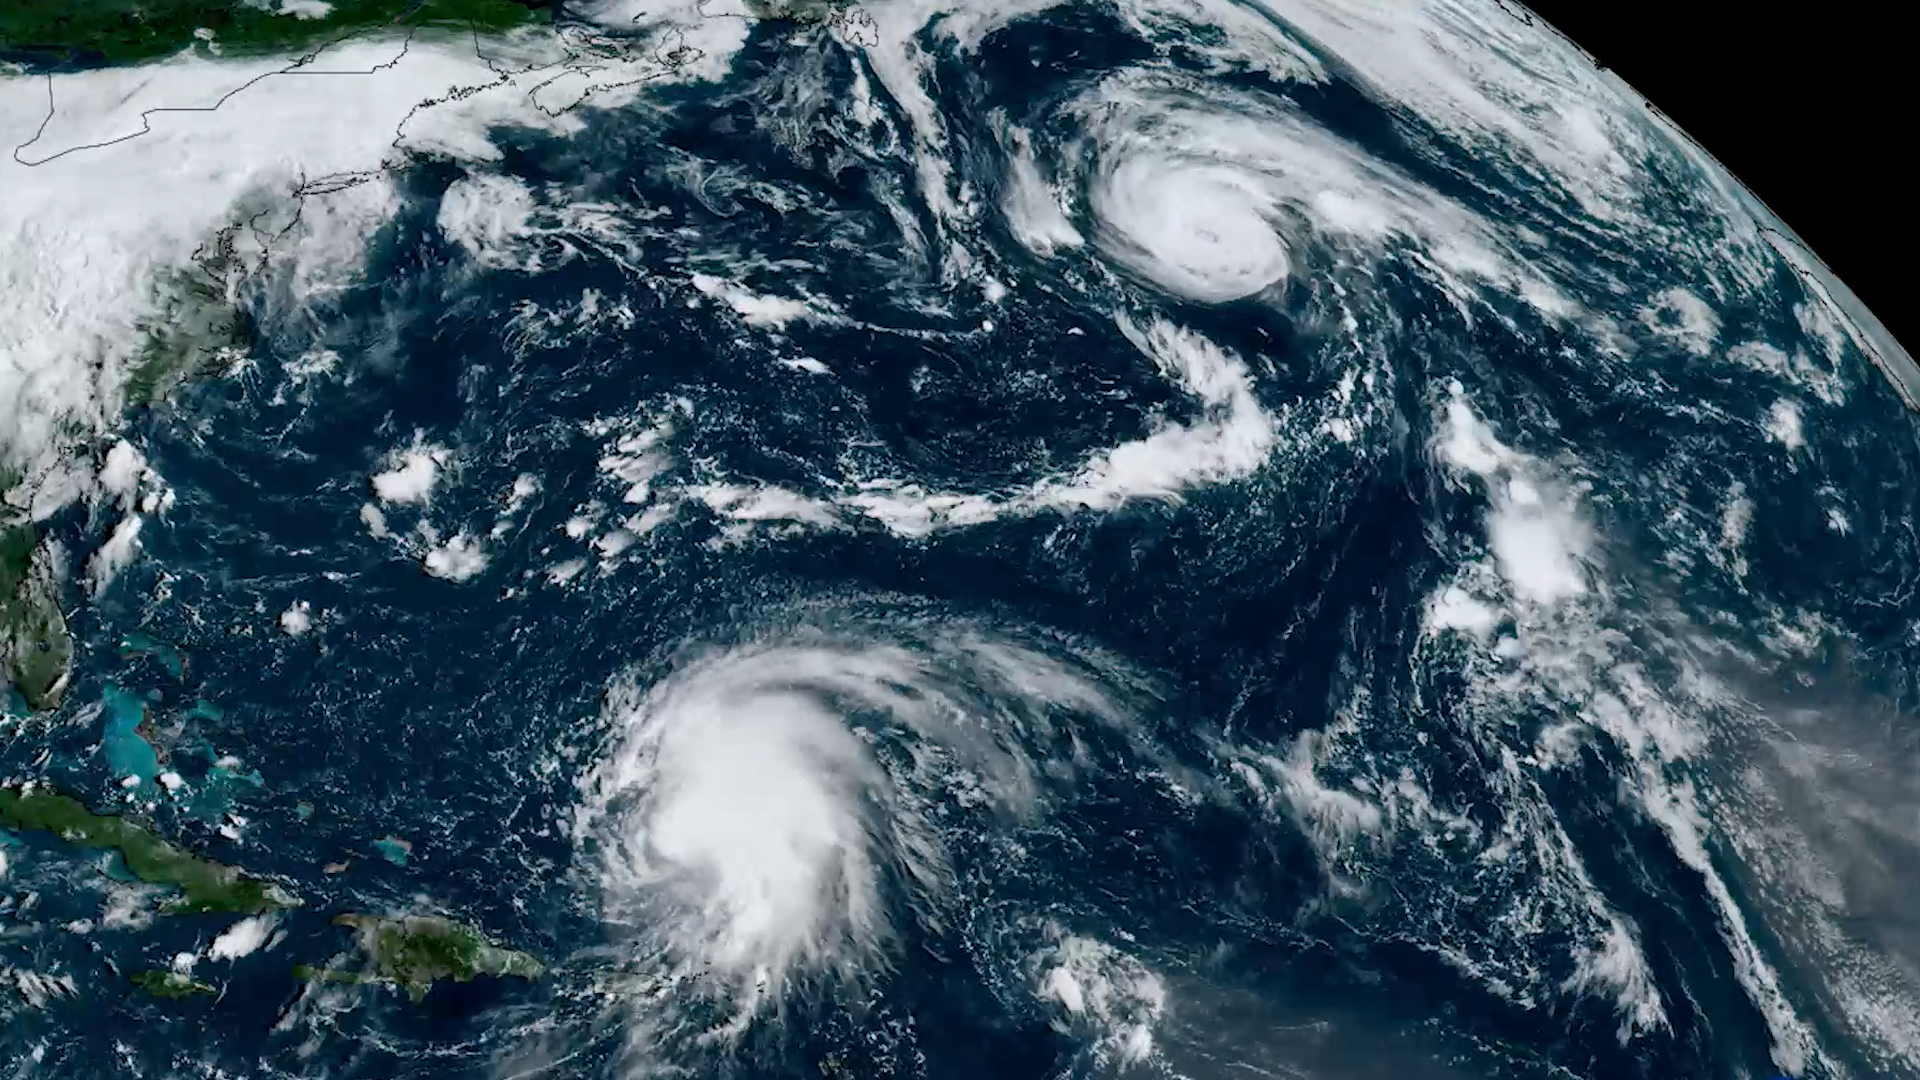 Earth from Orbit: First Atlantic Hurricanes of 2022 Arrive